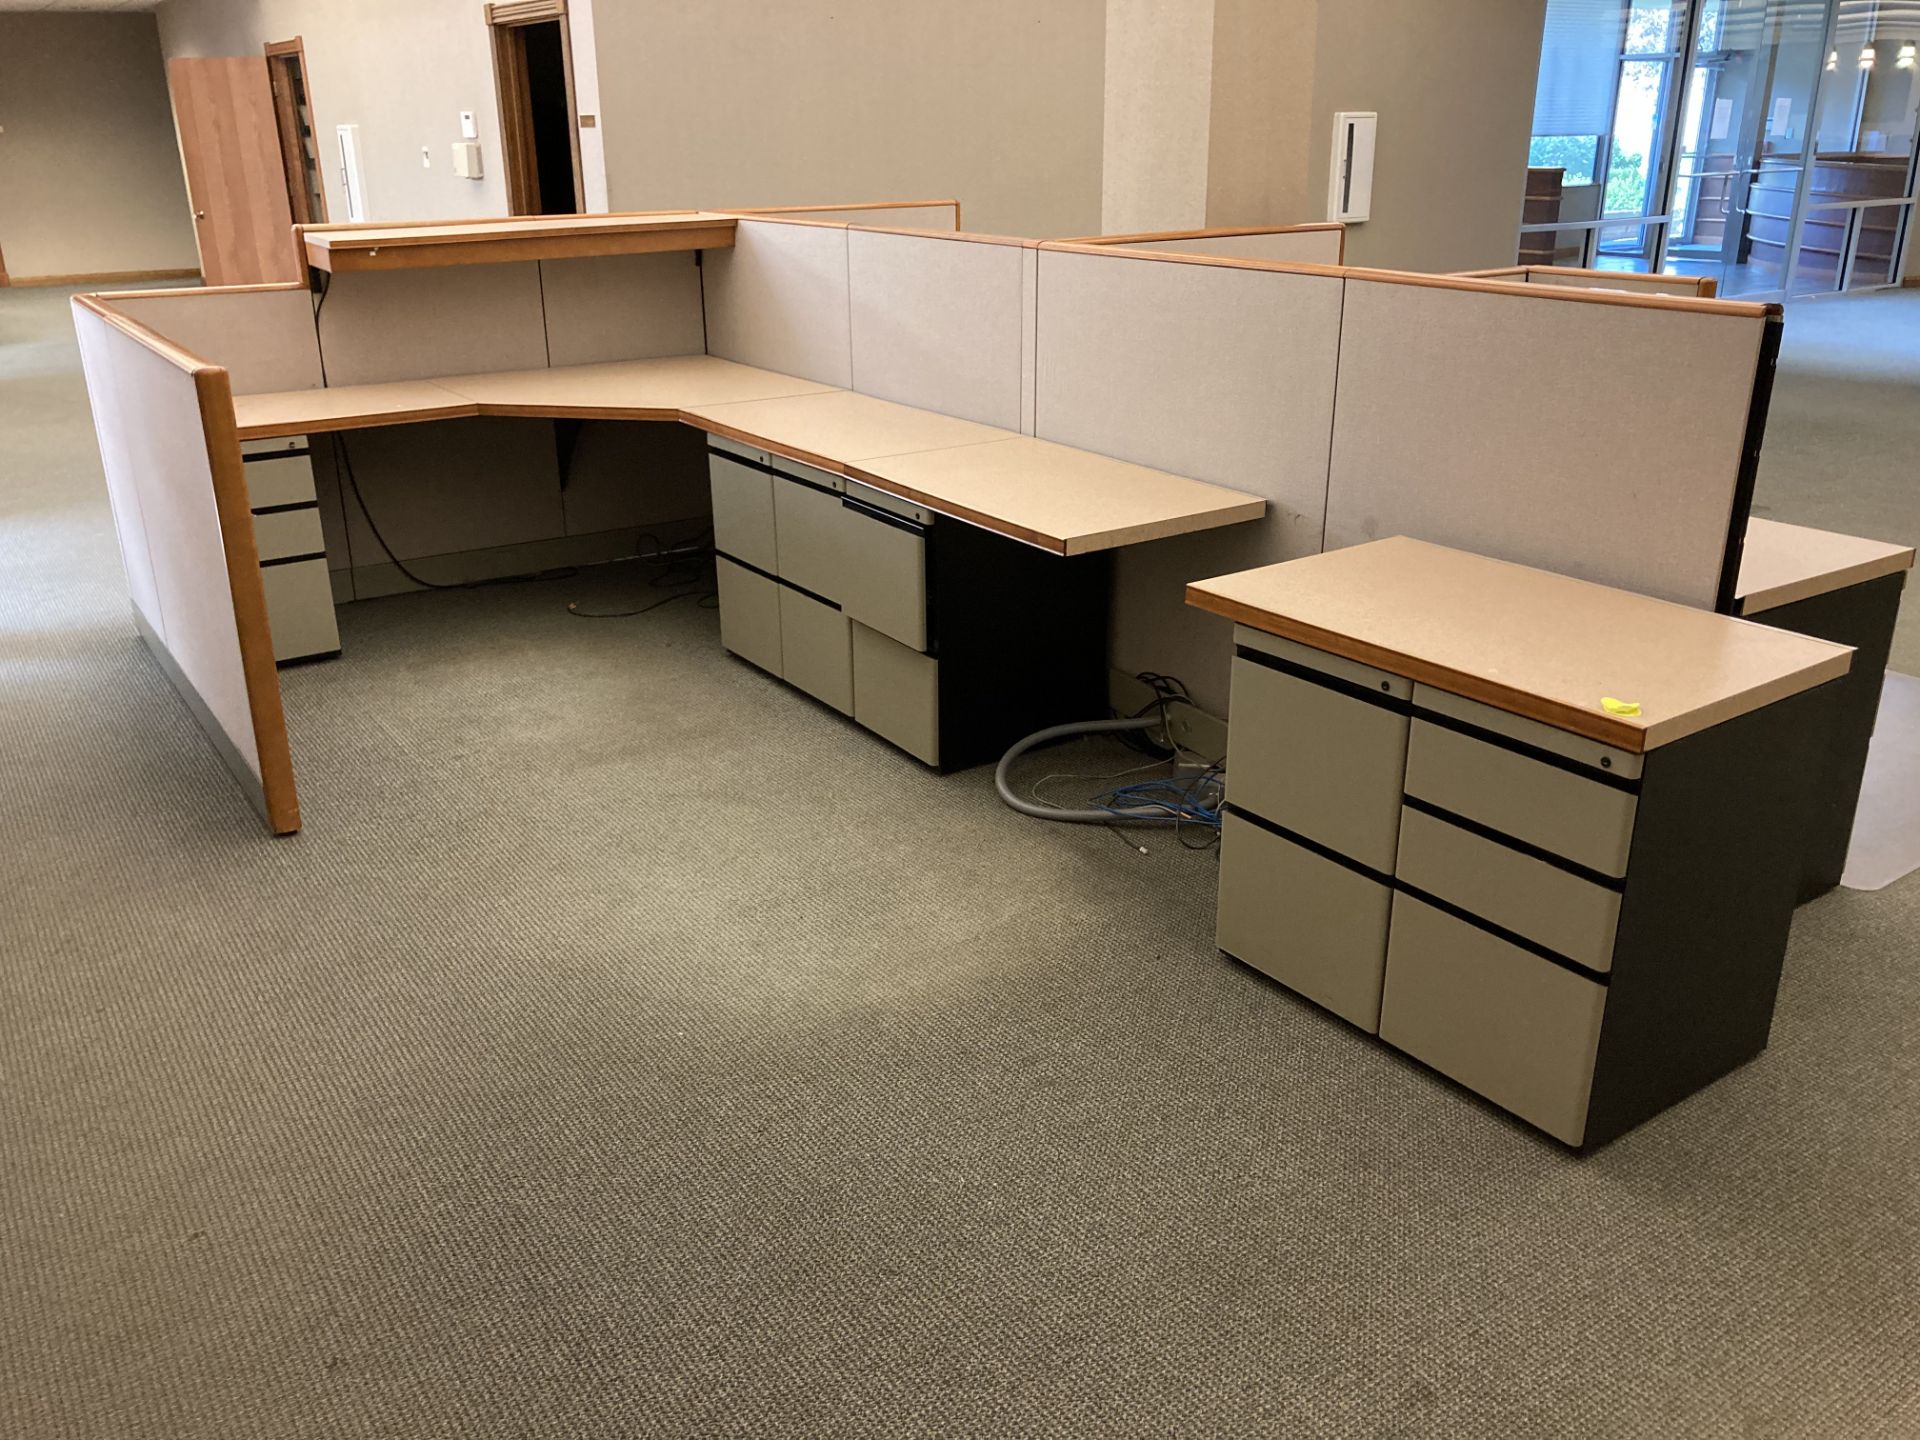 Cubicles with desks and cabinets - Image 2 of 3